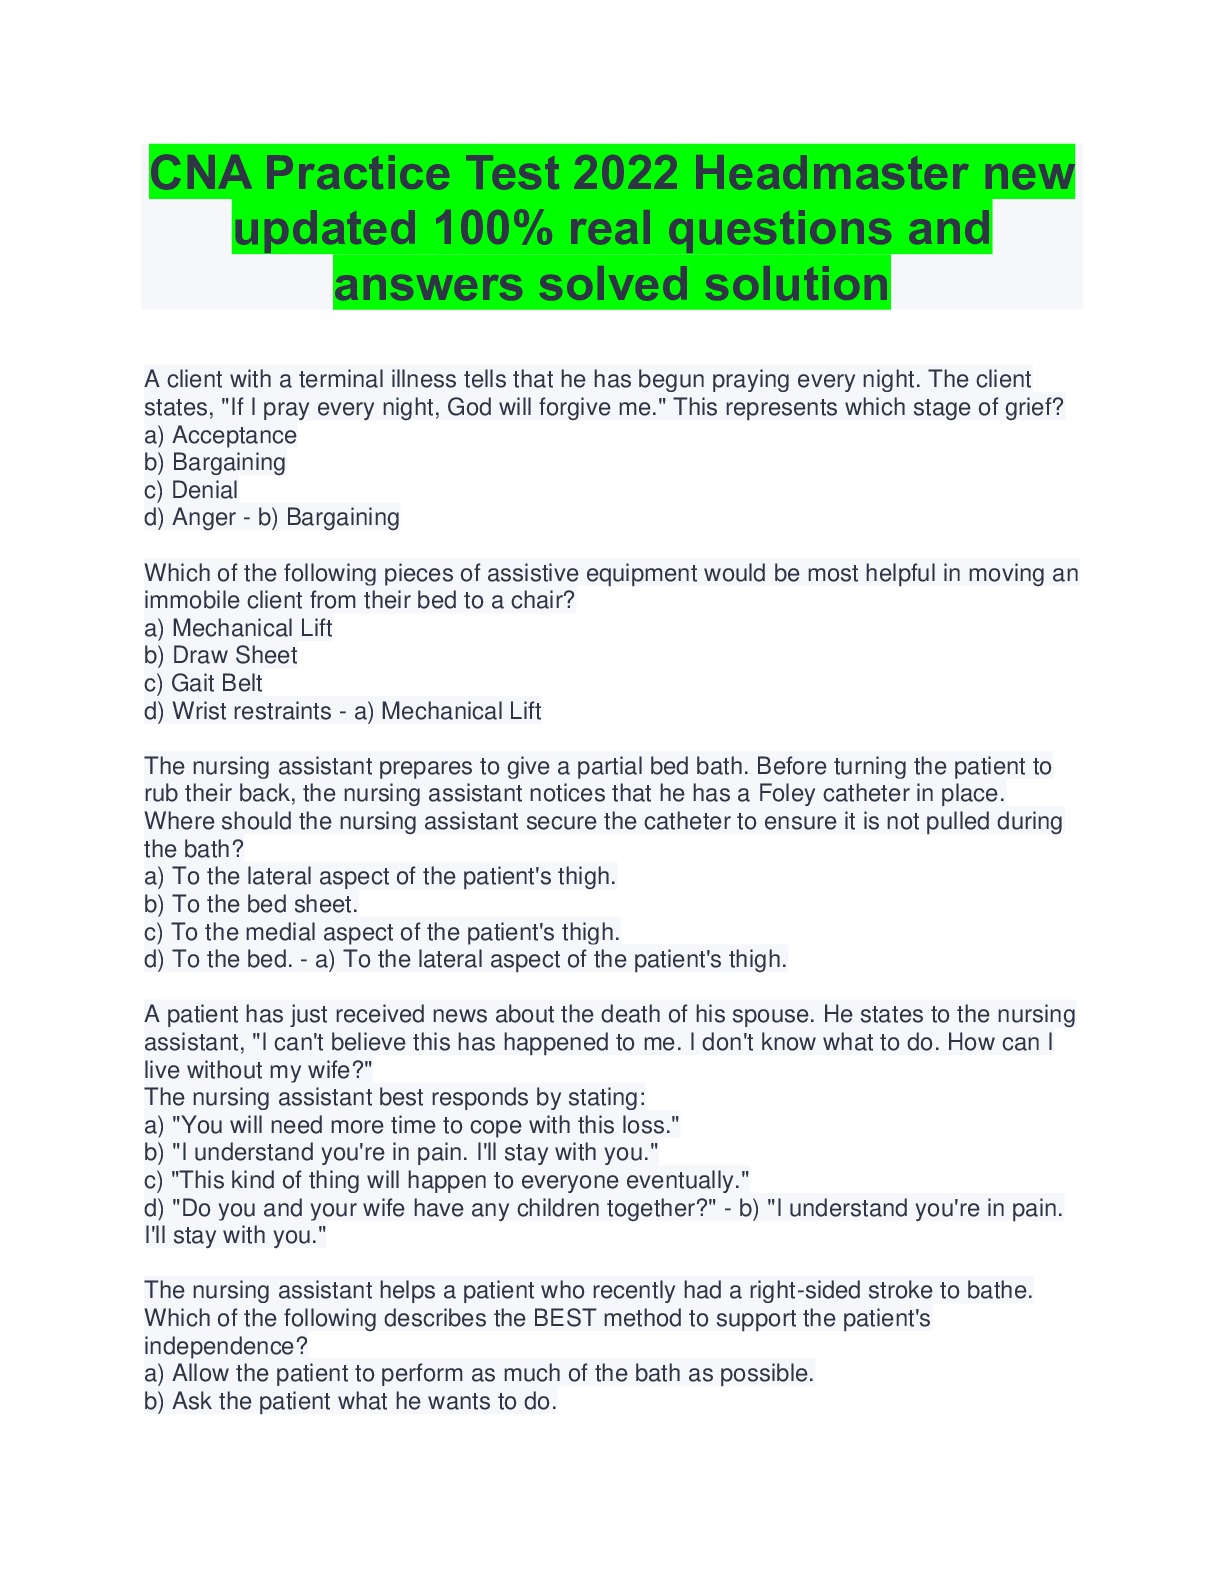 CNA Practice Test 2022 Headmaster new updated 100 real questions and